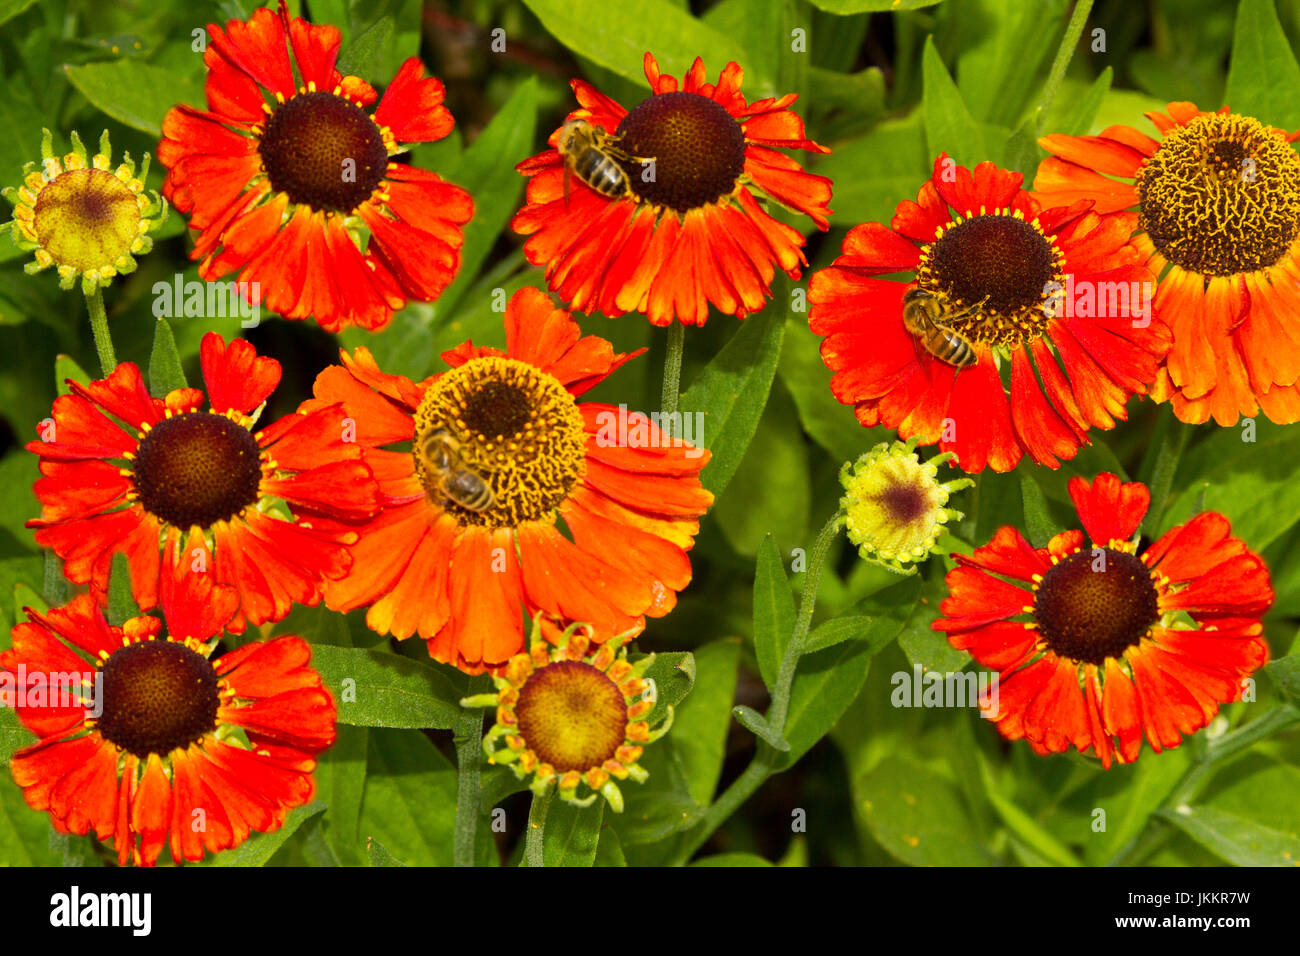 Cluster of vivid orange / red flowers of Helenium 'Sahin's Early Flowerer' against a background of green foliage Stock Photo